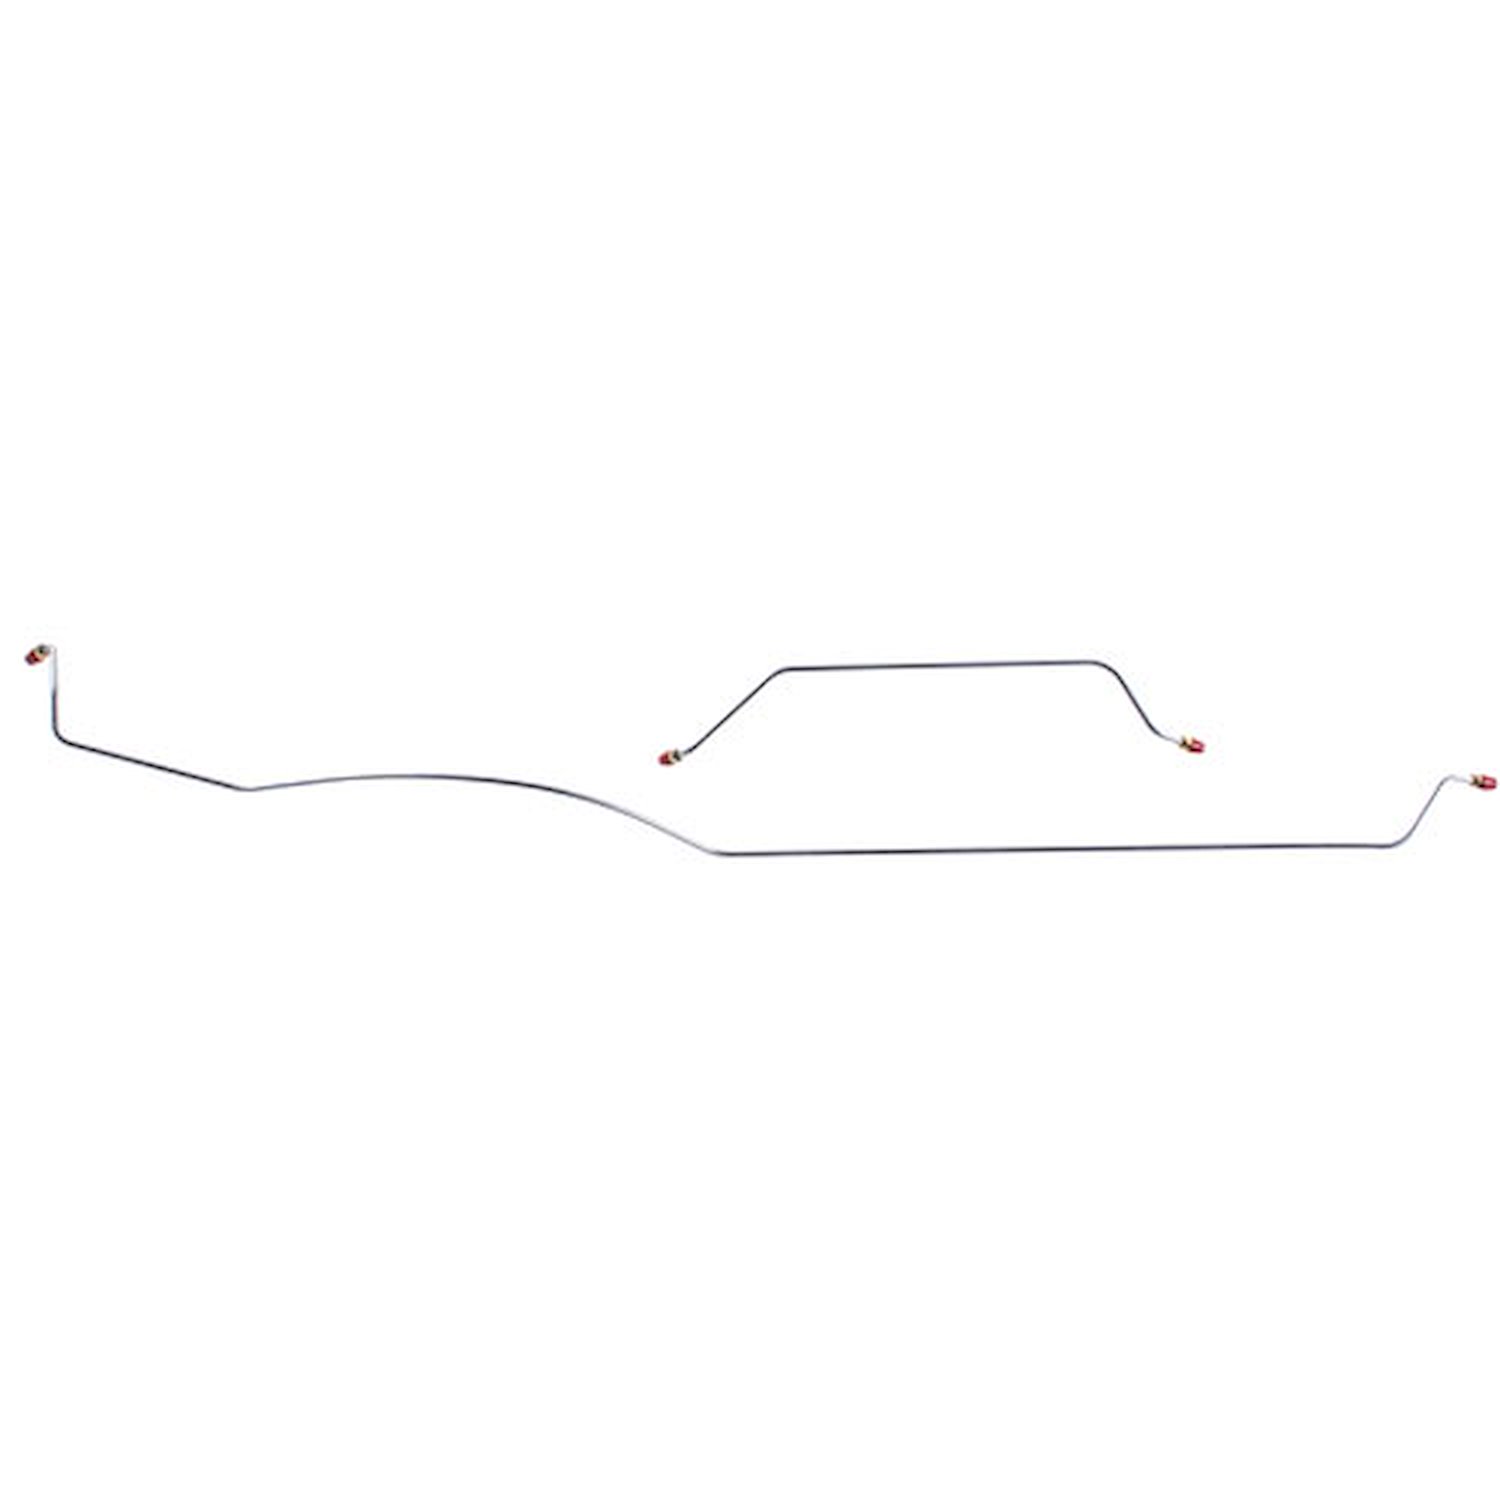 61 -62 All Cars - Rear Axle Brake Lines